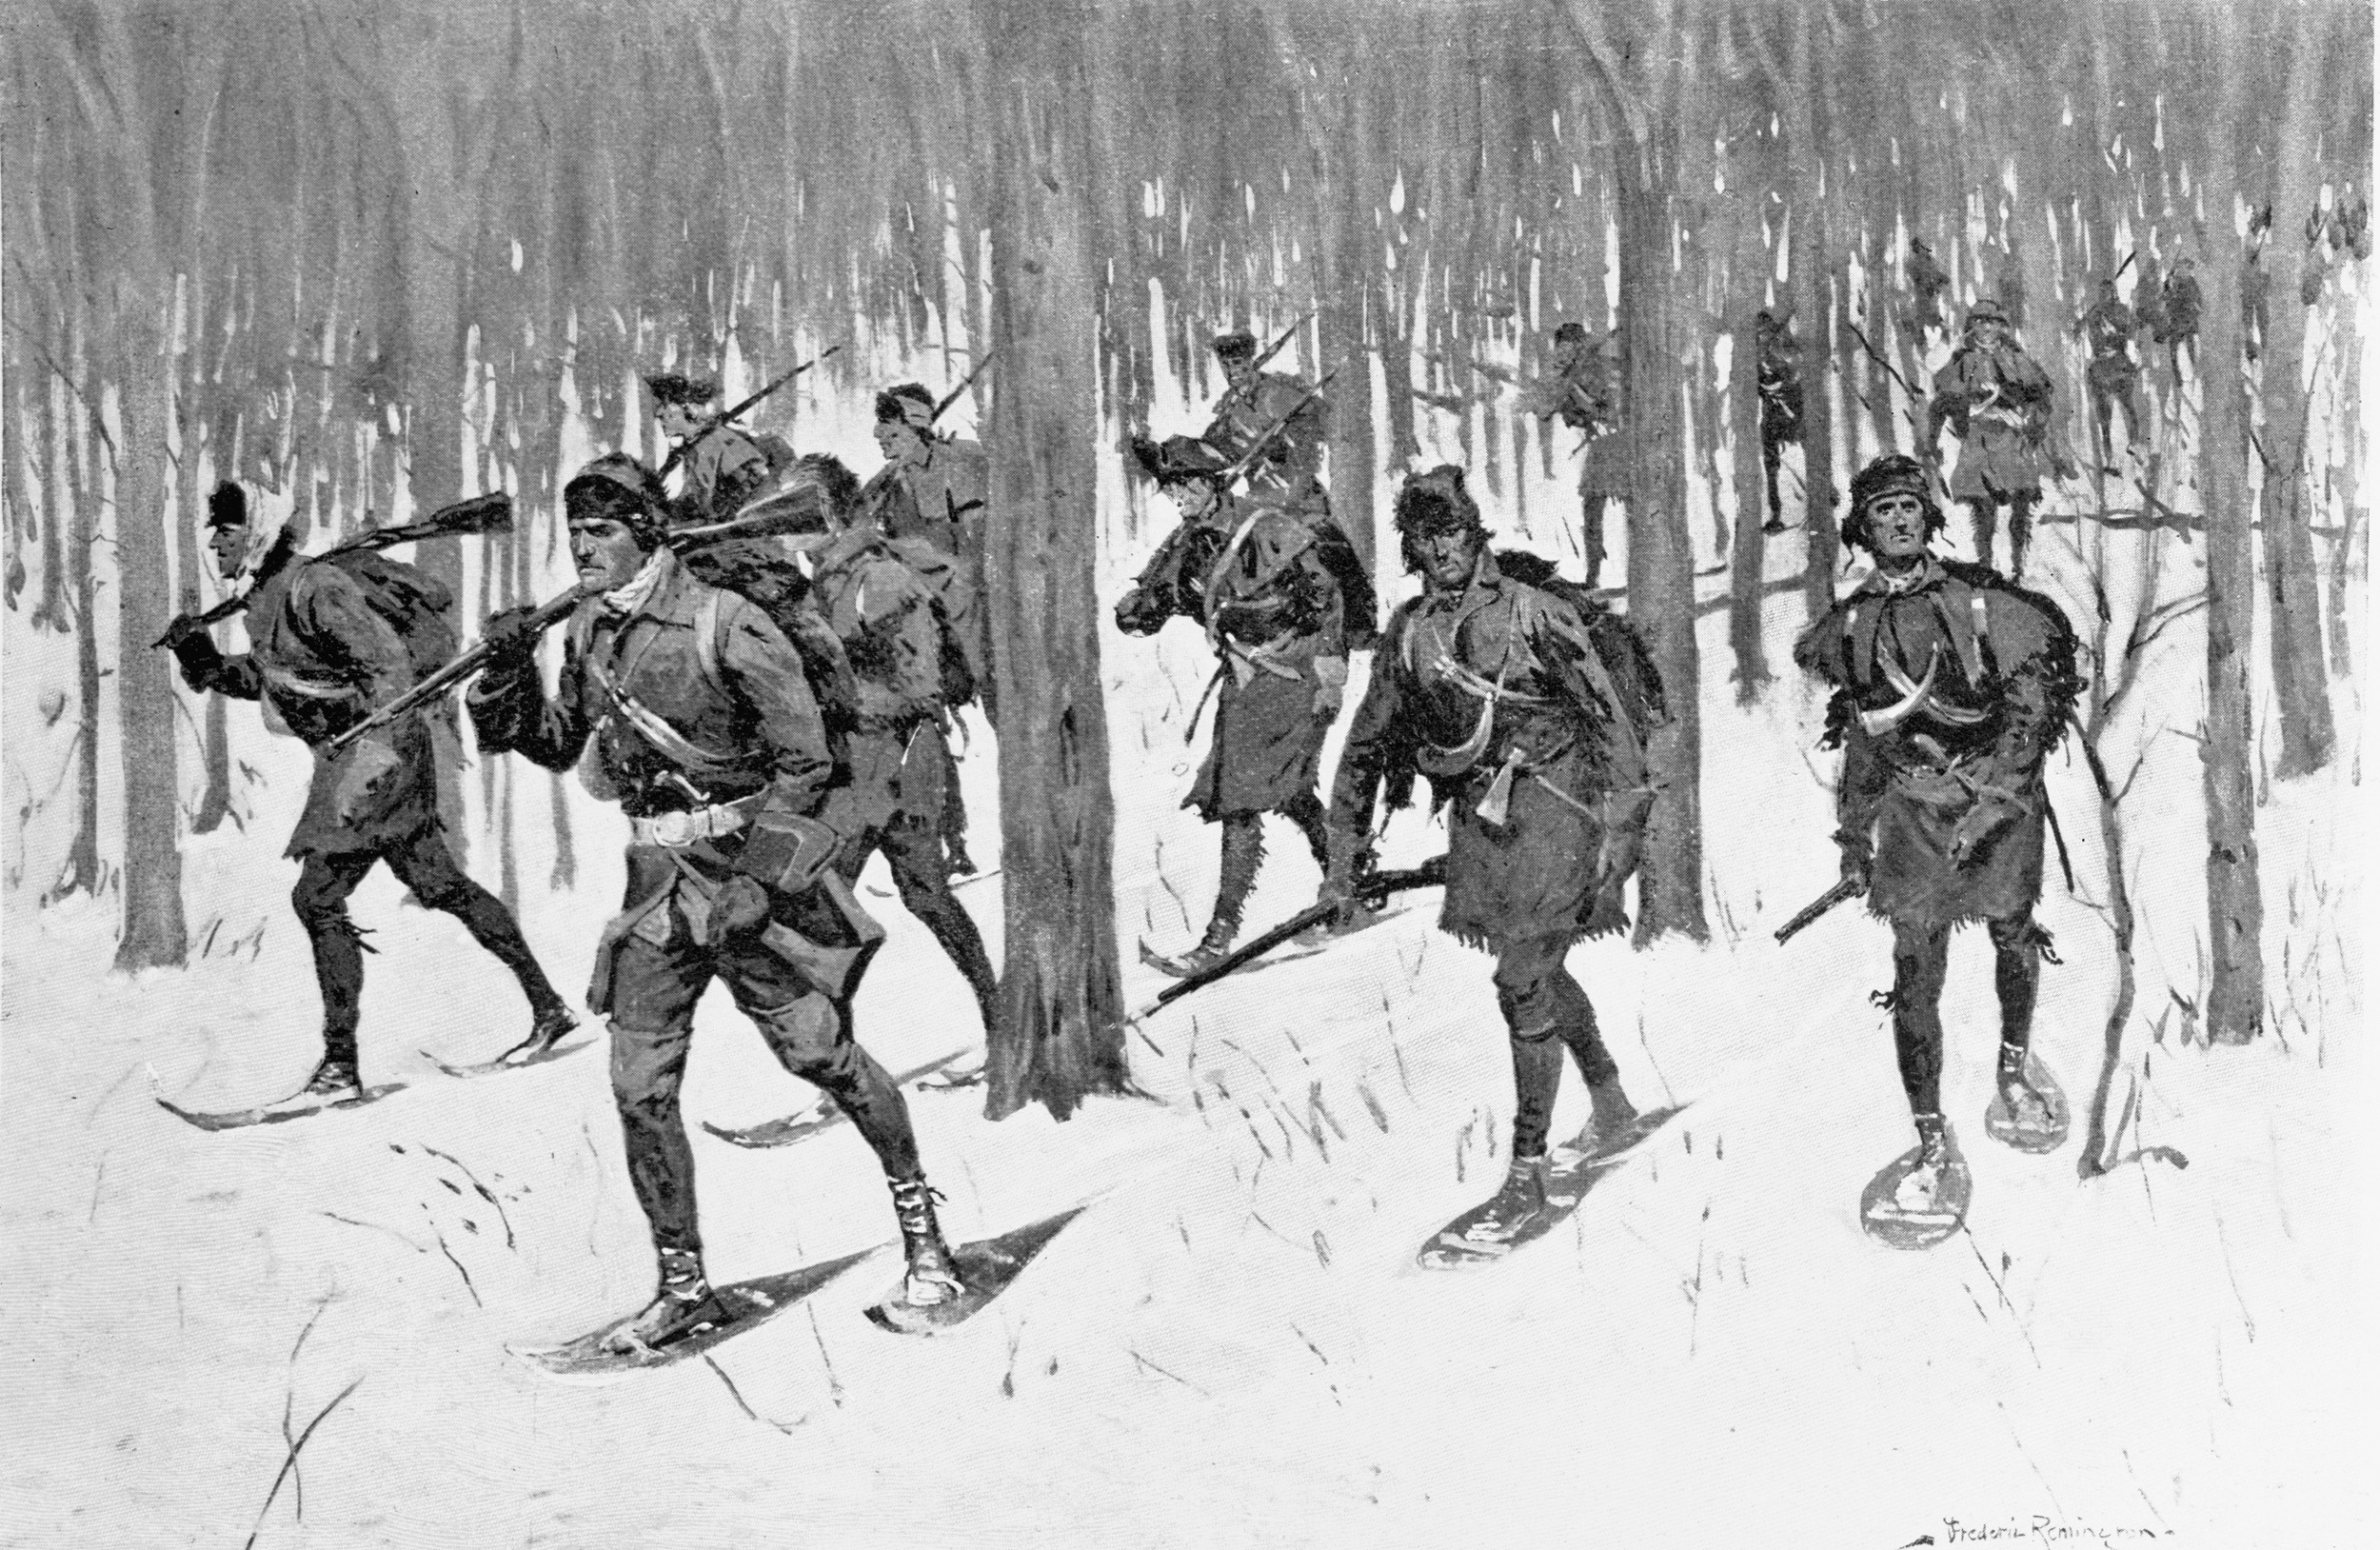 The Rangers move through wintery forest on snowshoes. In reality, their clothing was not nearly so uniform.